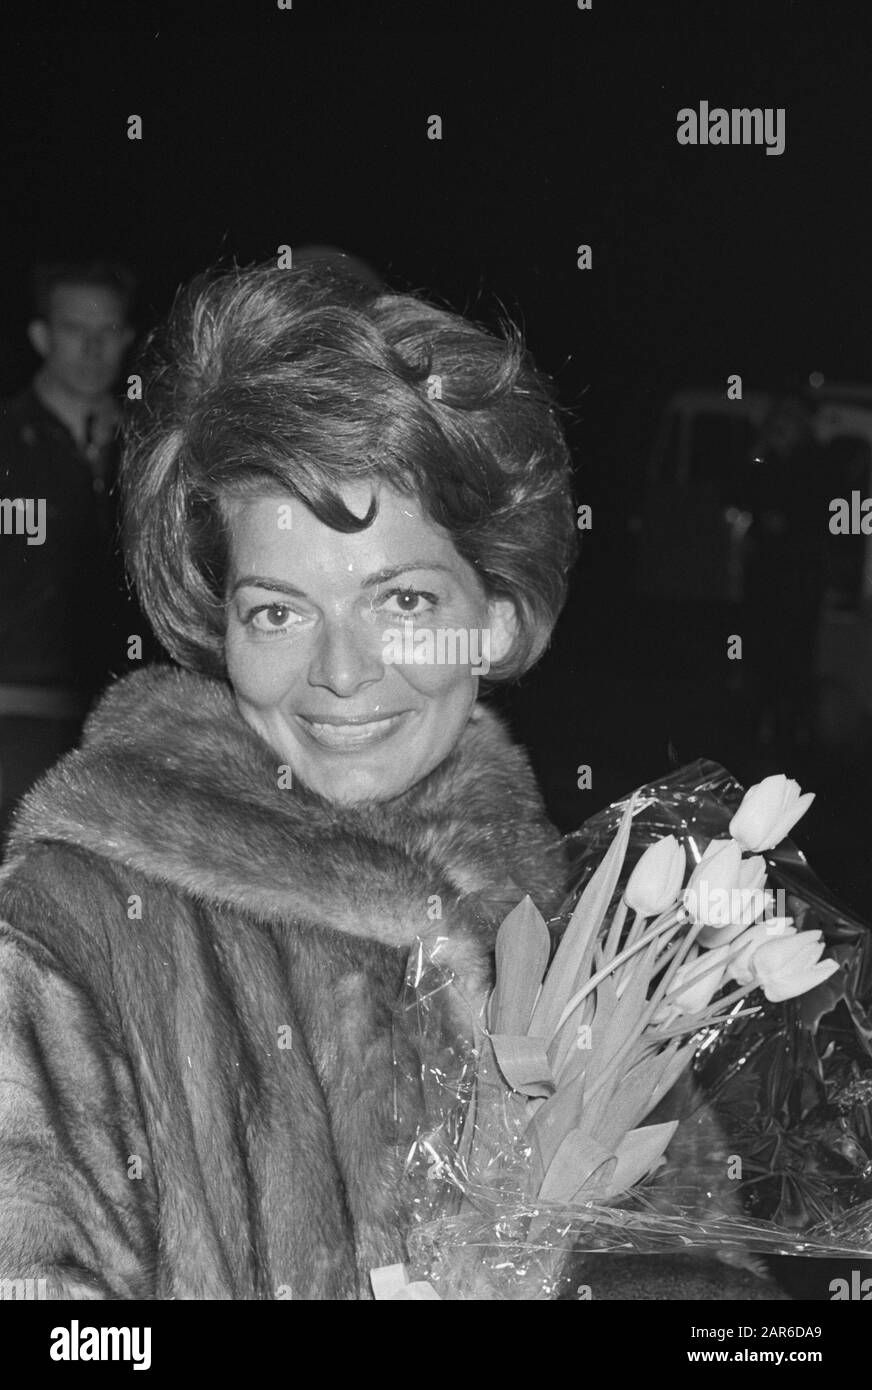 Lys Assia again in the Netherlands. Lys Assia (heading) nr. 7 Date: March 15, 1963 Location: Netherlands Personal name: Assia, Lys Stock Photo